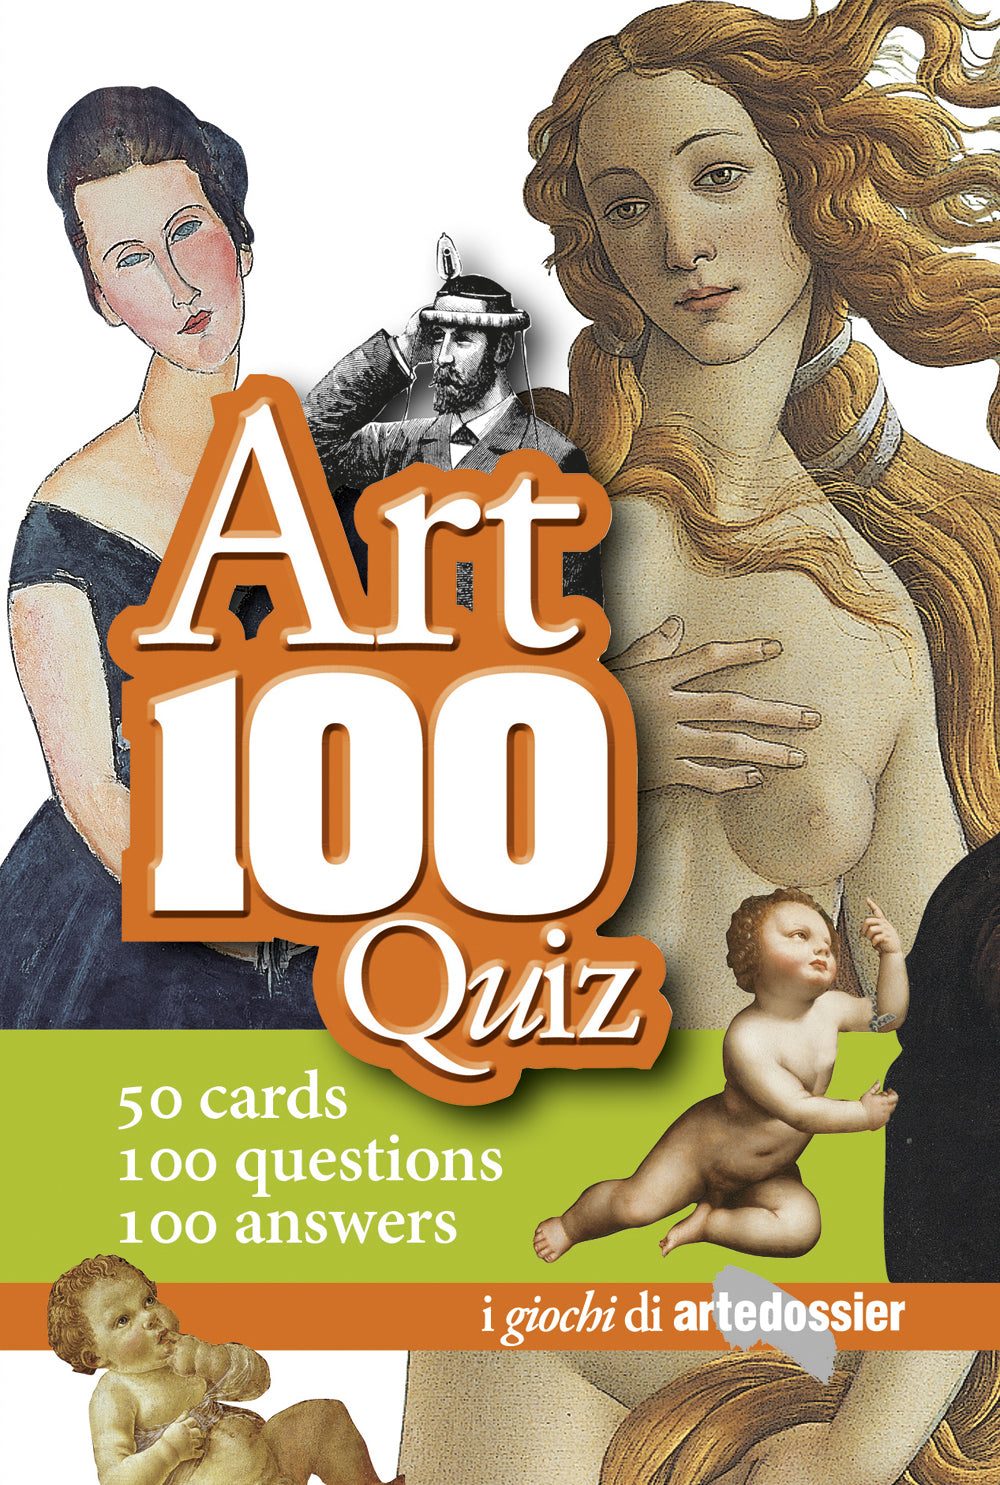 Art 100 quiz . 50 cards, 100 questions, 100 answers